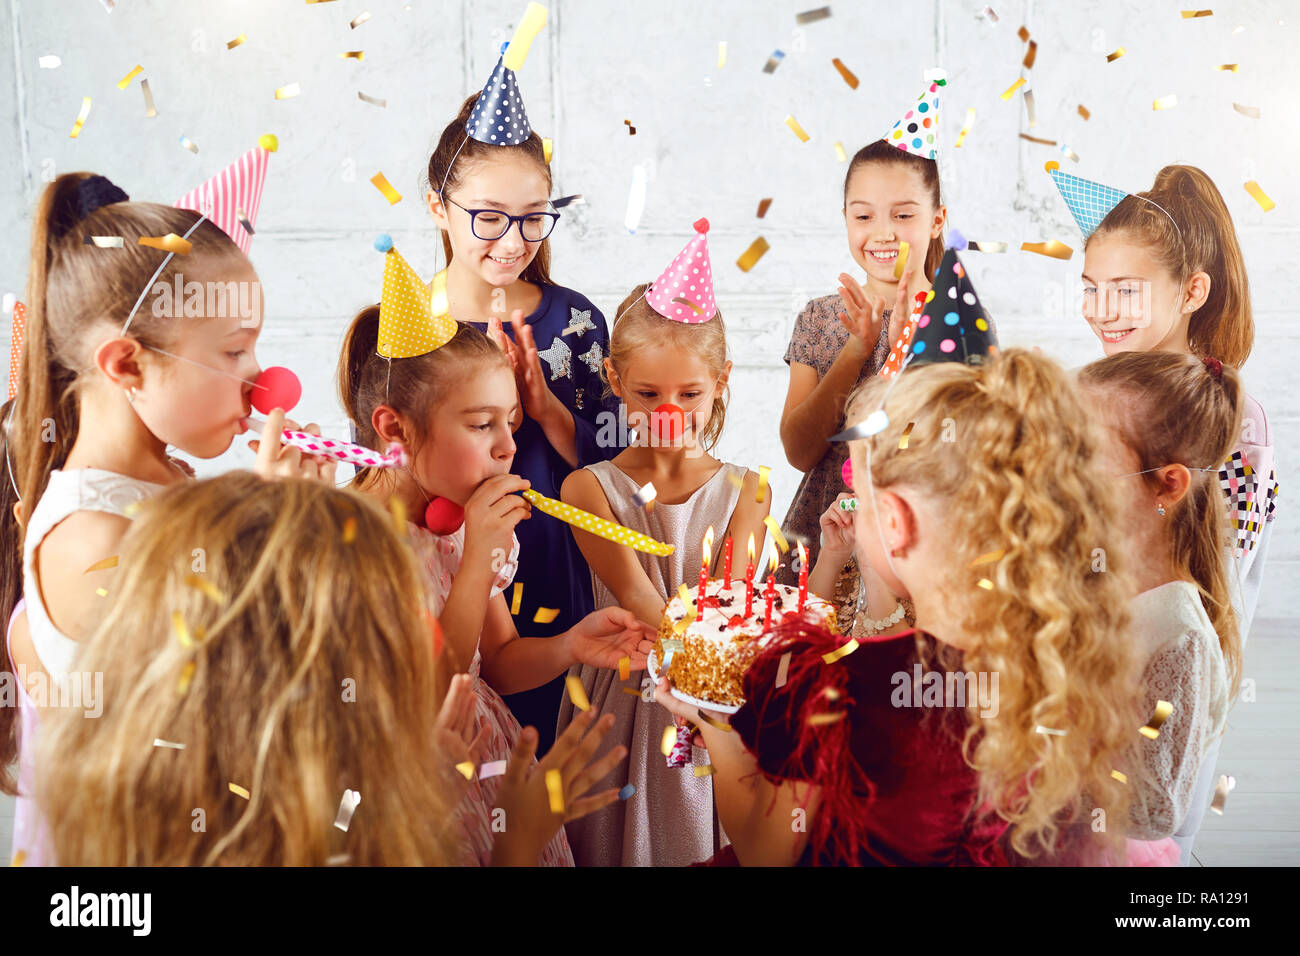 Children with a birthday cake have fun. Stock Photo